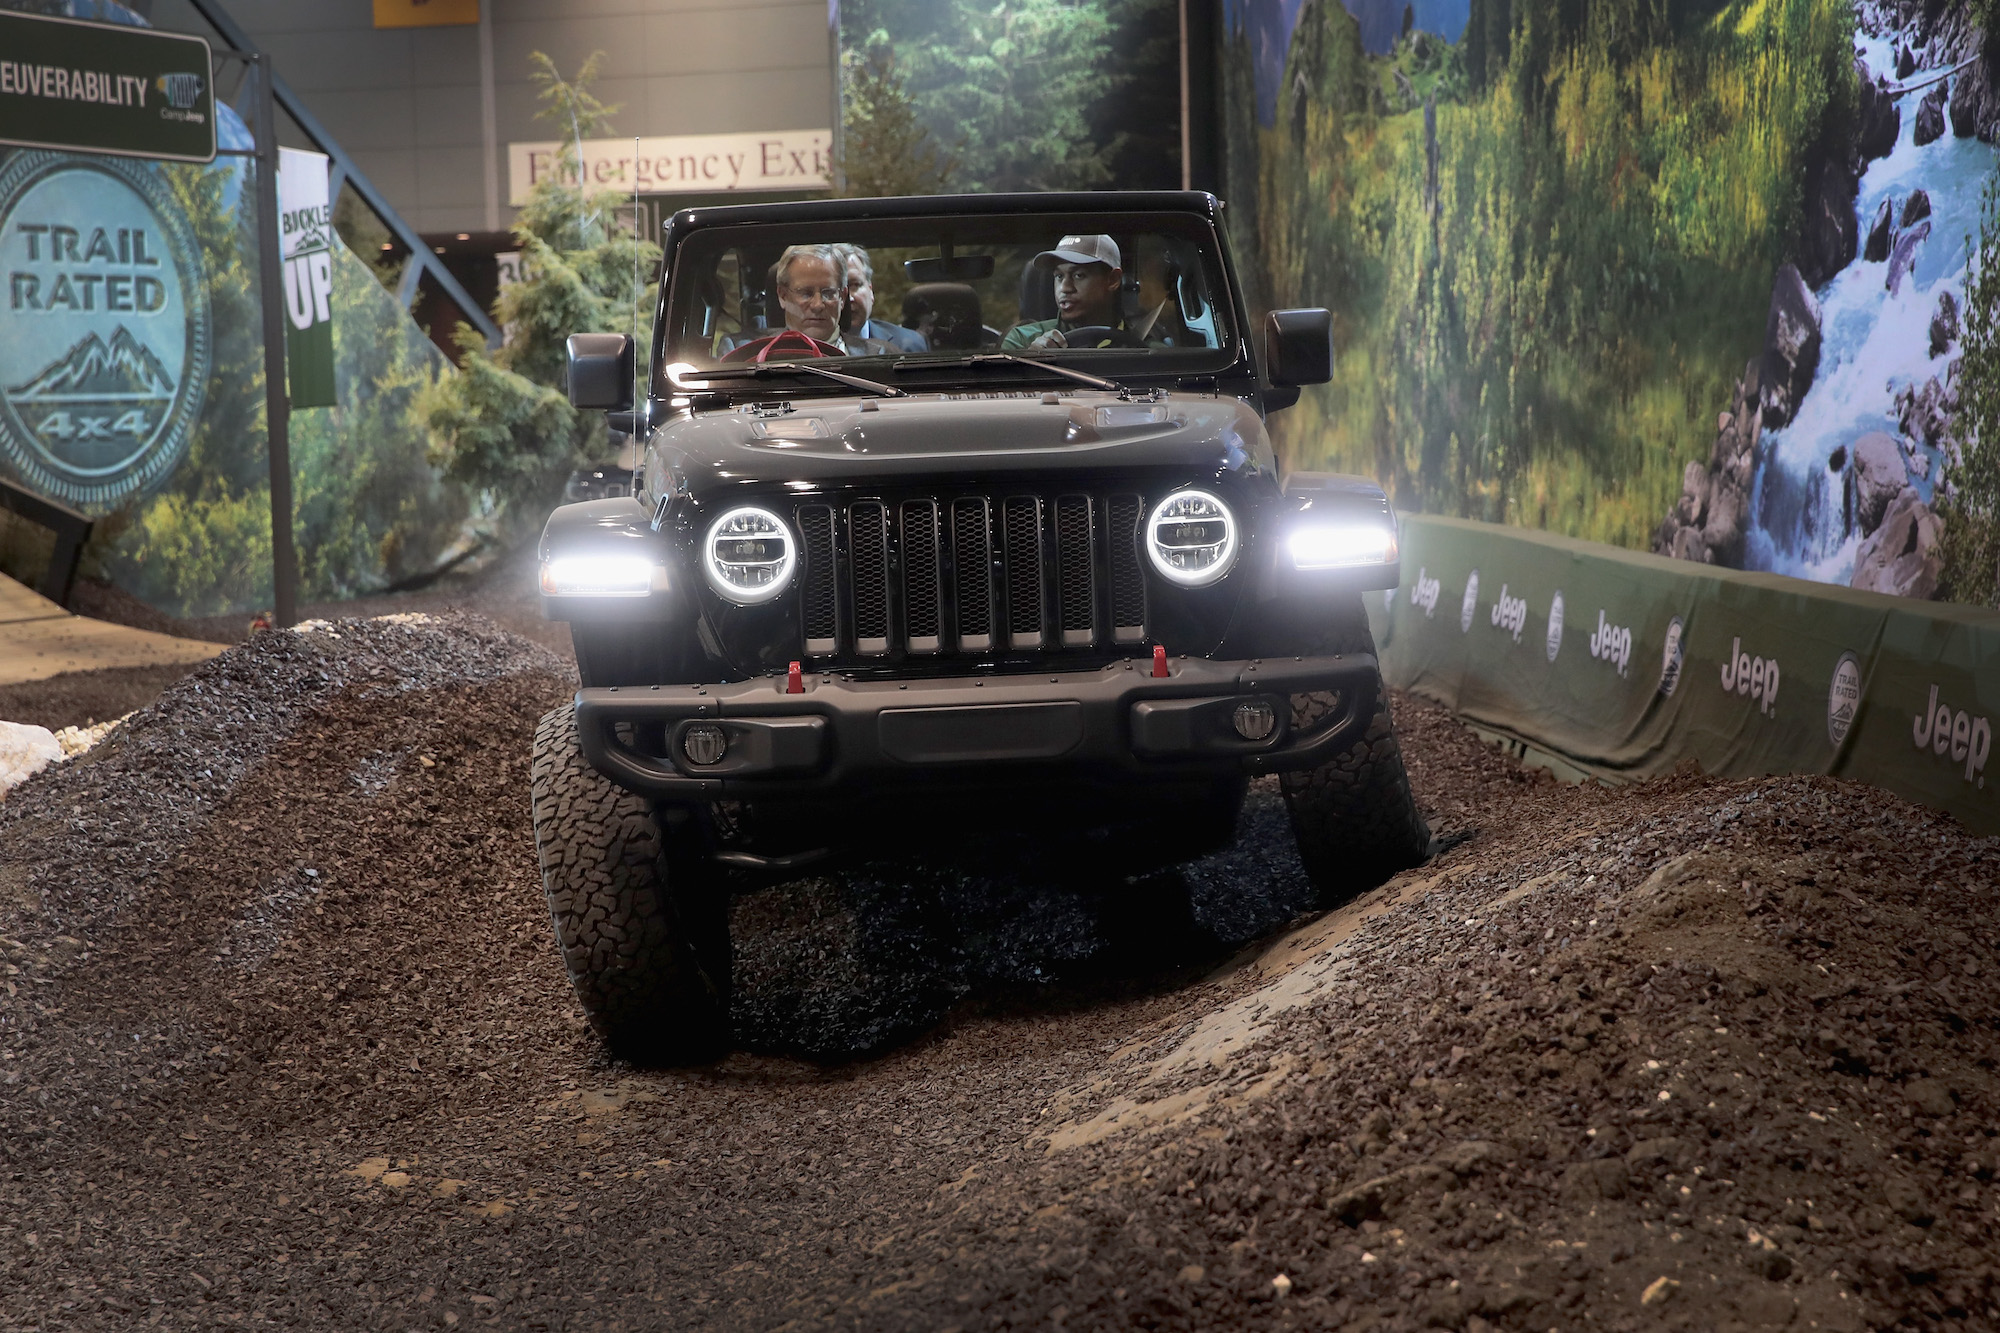 Guests drive a 2018 Jeep Wrangler on a simulated off-road course at the Chicago Auto Show on February 8, 2018, in Chicago, Illinois.